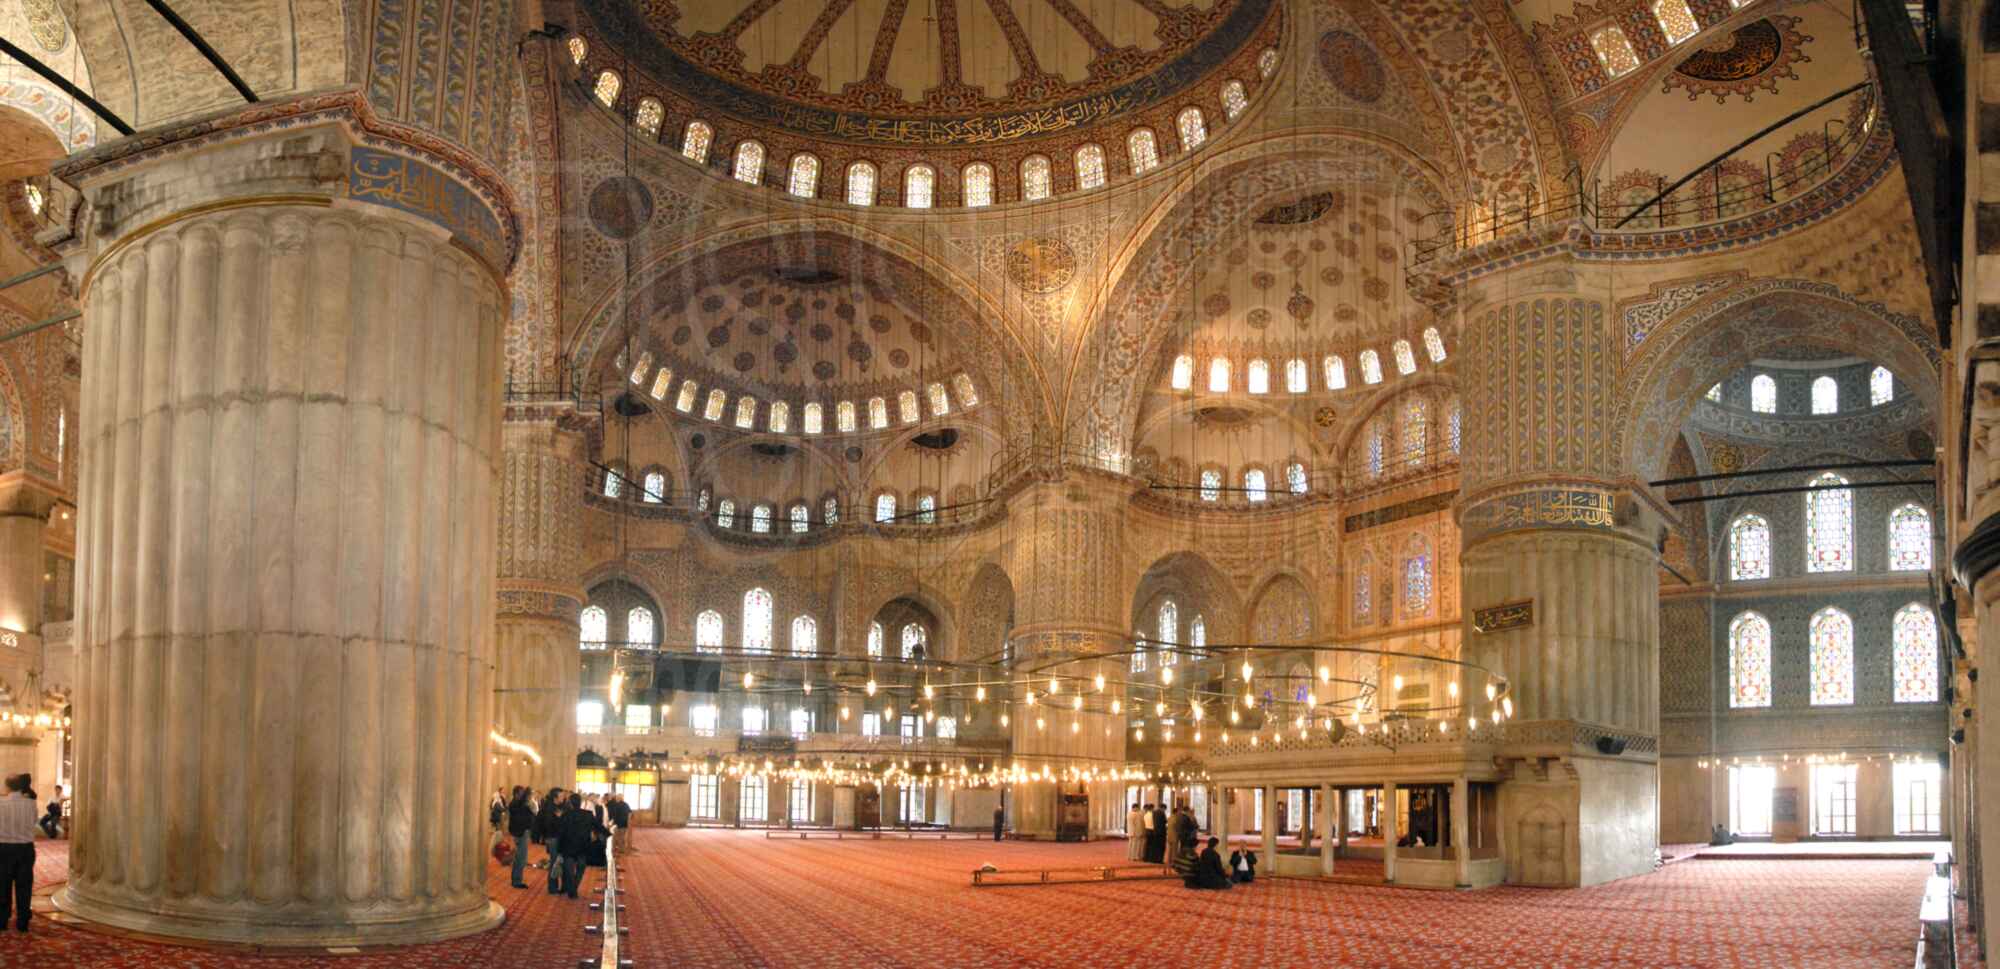 Panorama Photo Of Blue Mosque Interior By Photo Stock Source